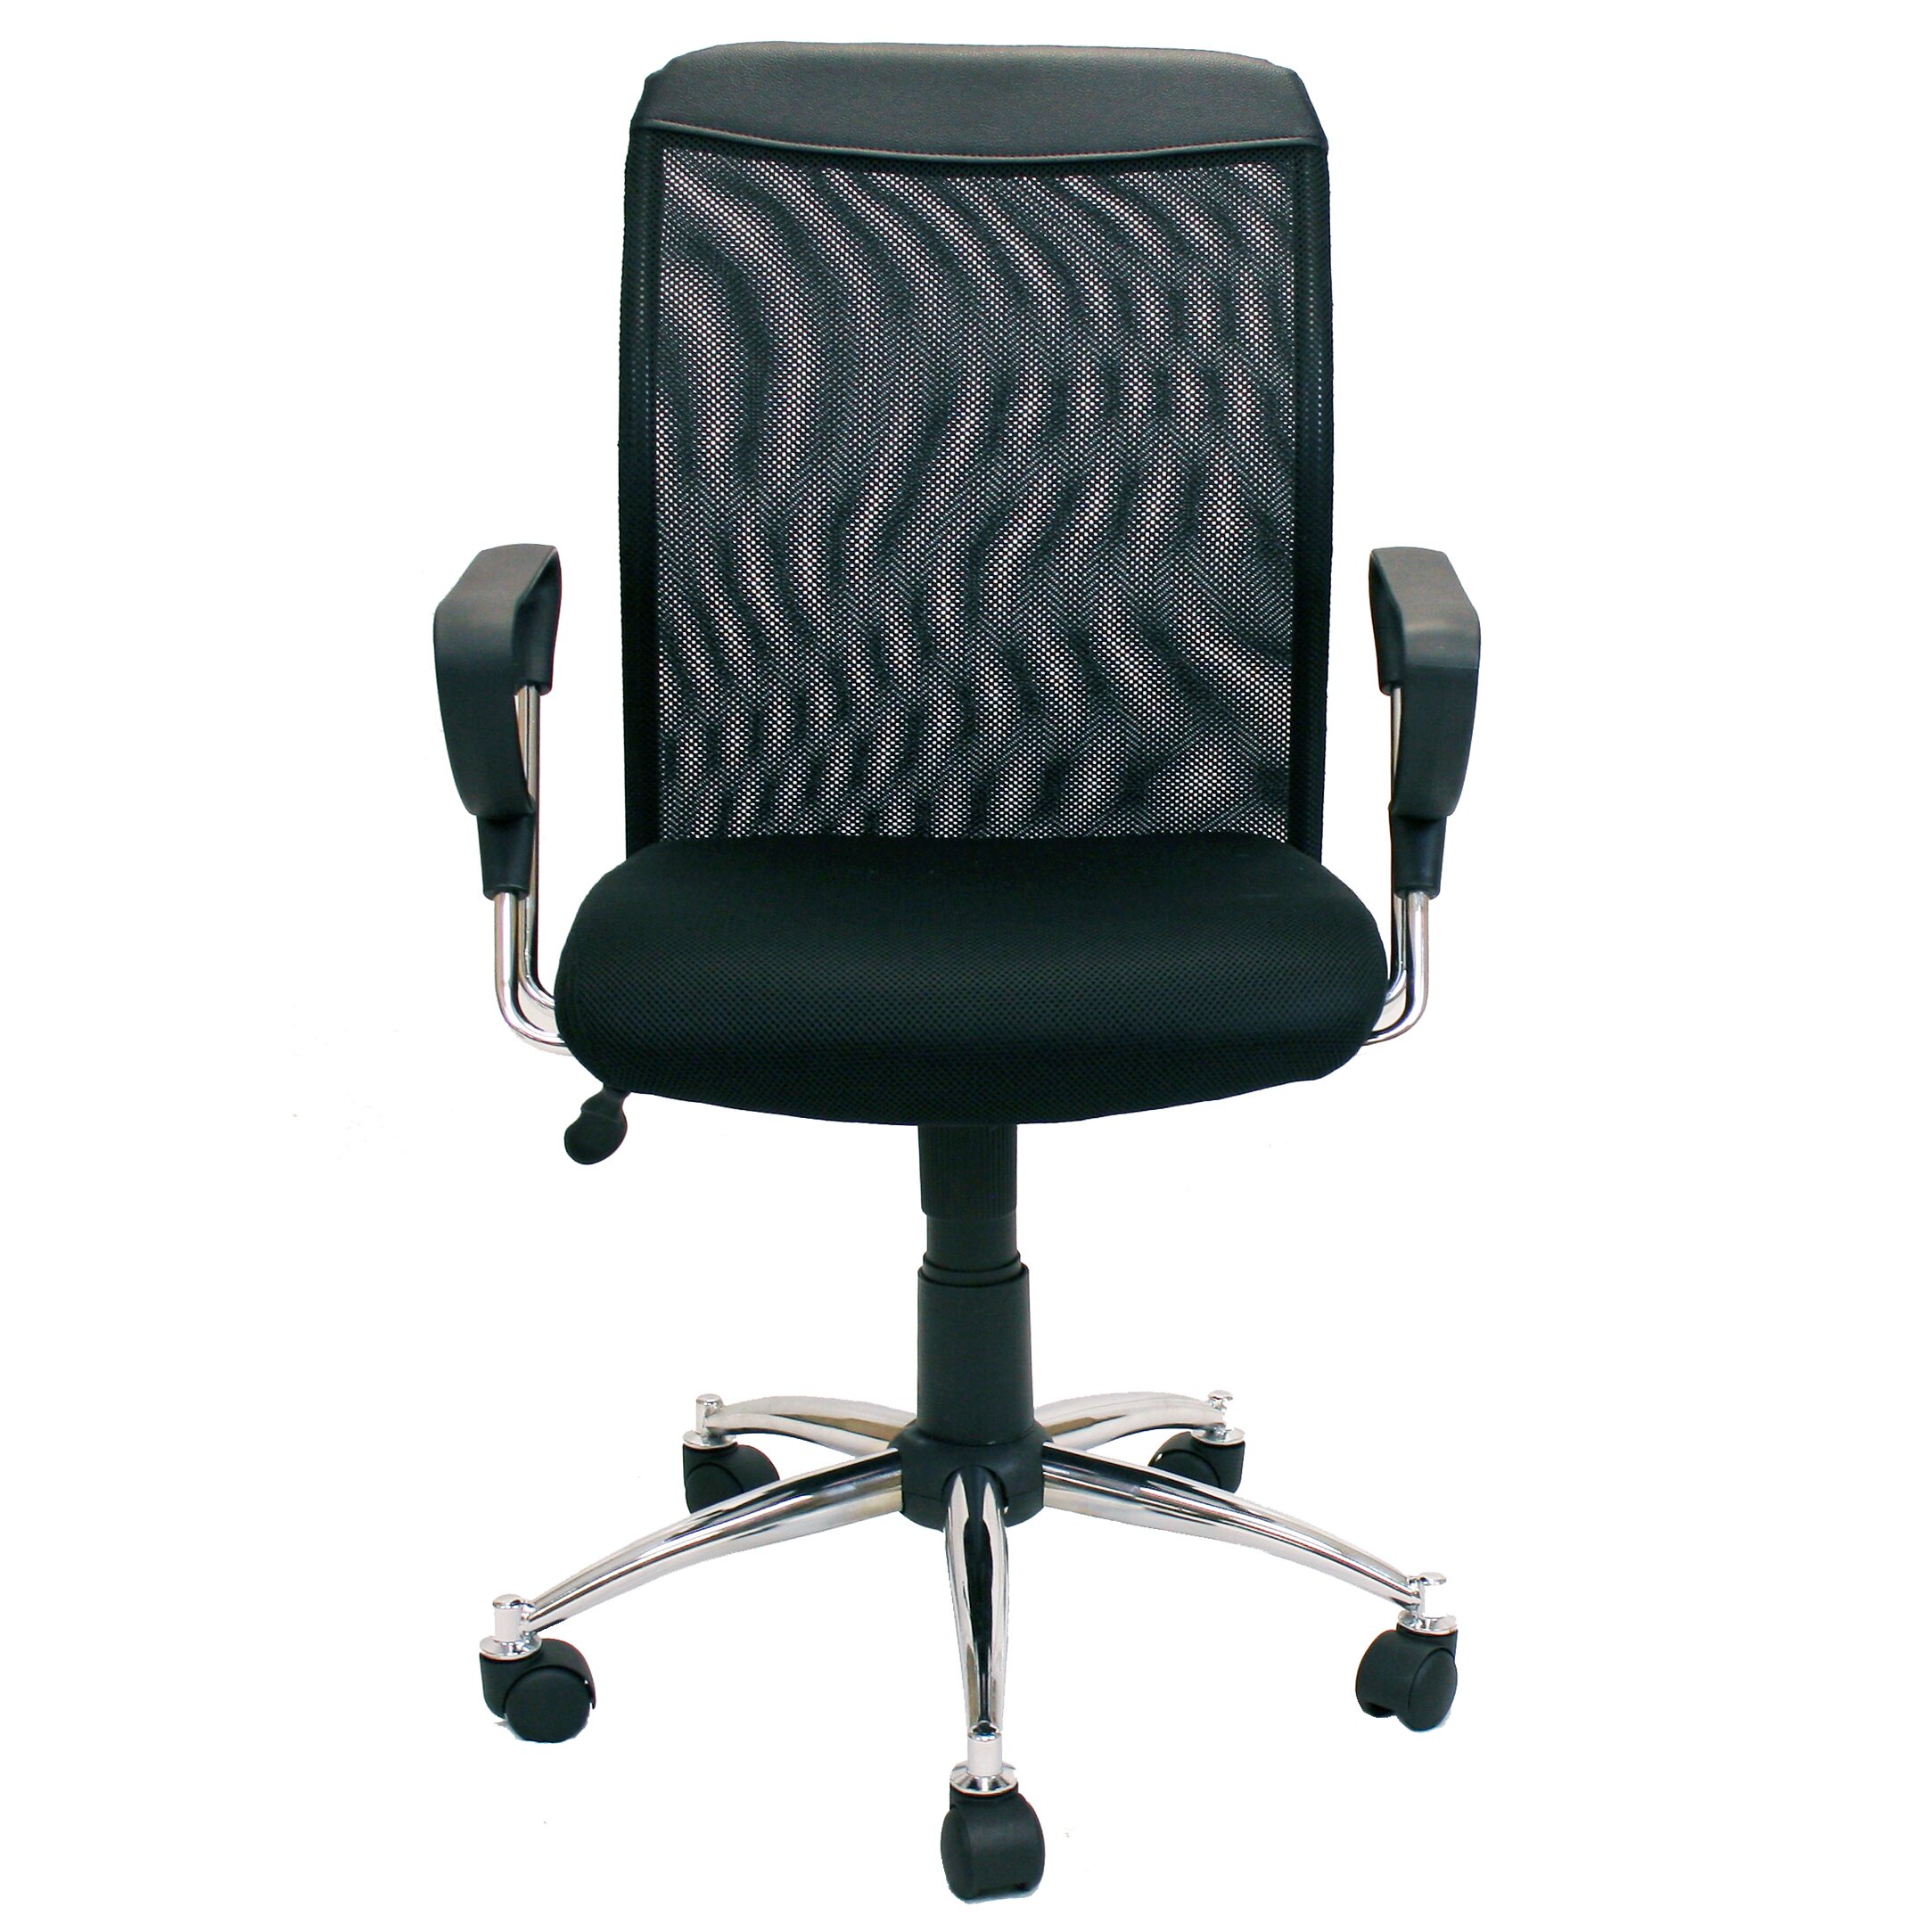 Low-Back Mesh Conference Chair | Wayfair